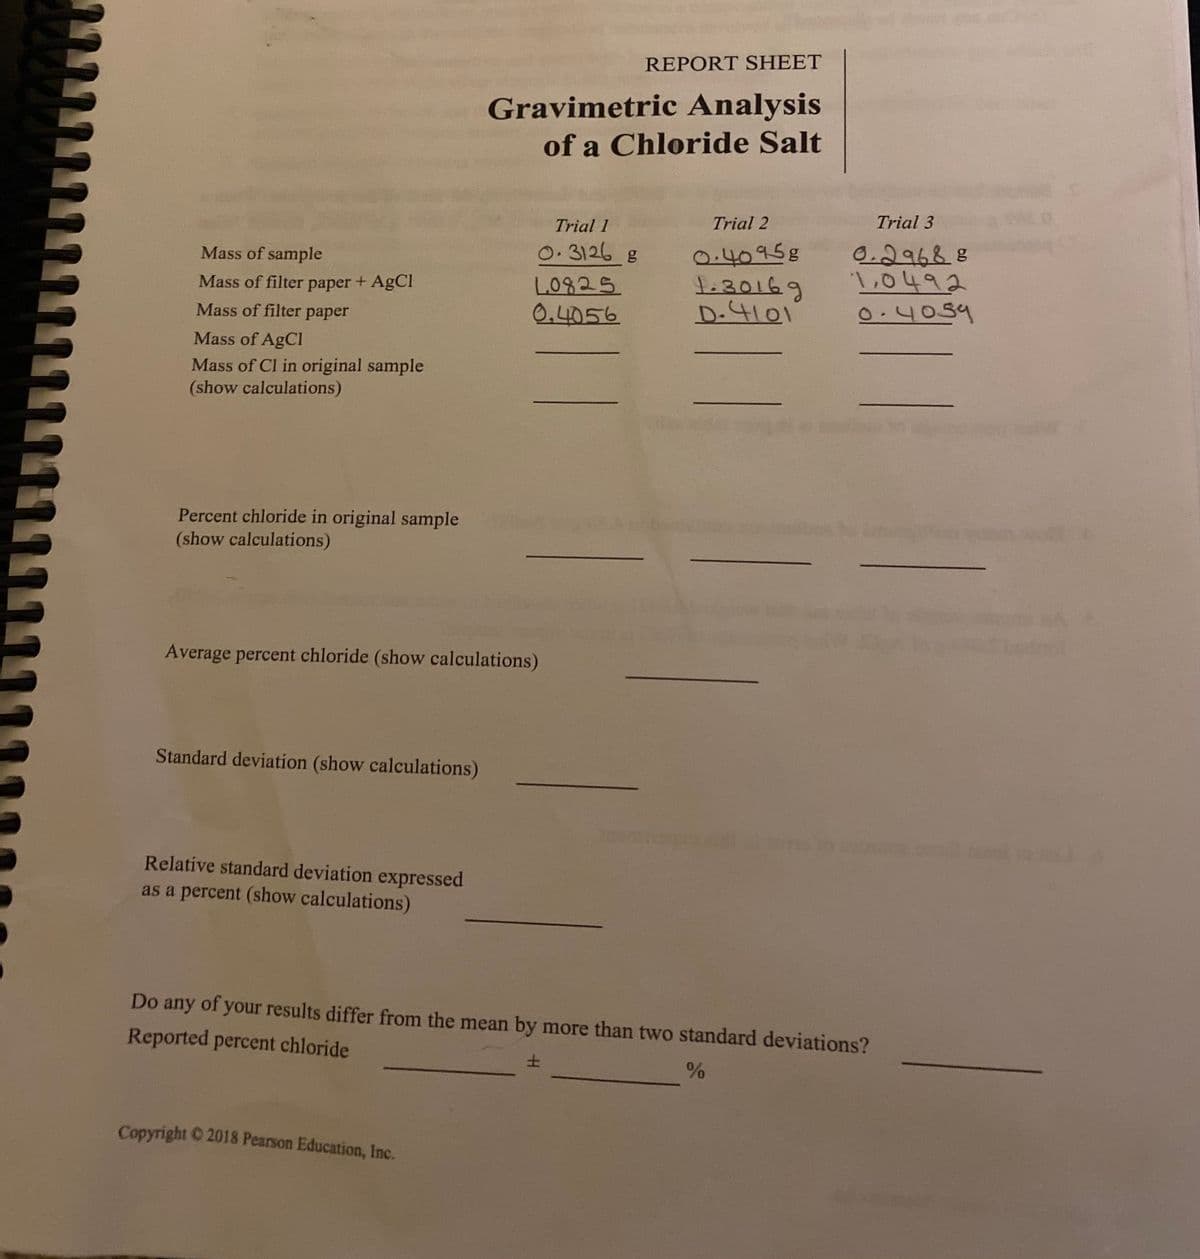 REPORT SHEET
Gravimetric Analysis
of a Chloride Salt
Trial 2
Trial 3
Trial 1
0.40958
t:30169
D.4101
0.29688
L0492
0.4059
Mass of sample
0.3126 g
Mass of filter paper + AgCI
L0825
Mass of filter paper
0,4056
Mass of AgCl
Mass of Cl in original sample
(show calculations)
Percent chloride in original sample
(show calculations)
Average percent chloride (show calculations)
Standard deviation (show calculations)
Relative standard deviation expressed
as a percent (show calculations)
Do any of your results differ from the mean by more than two standard deviations?
Reported percent chloride
土
Copyright 2018 Pearson Education, Inc.
